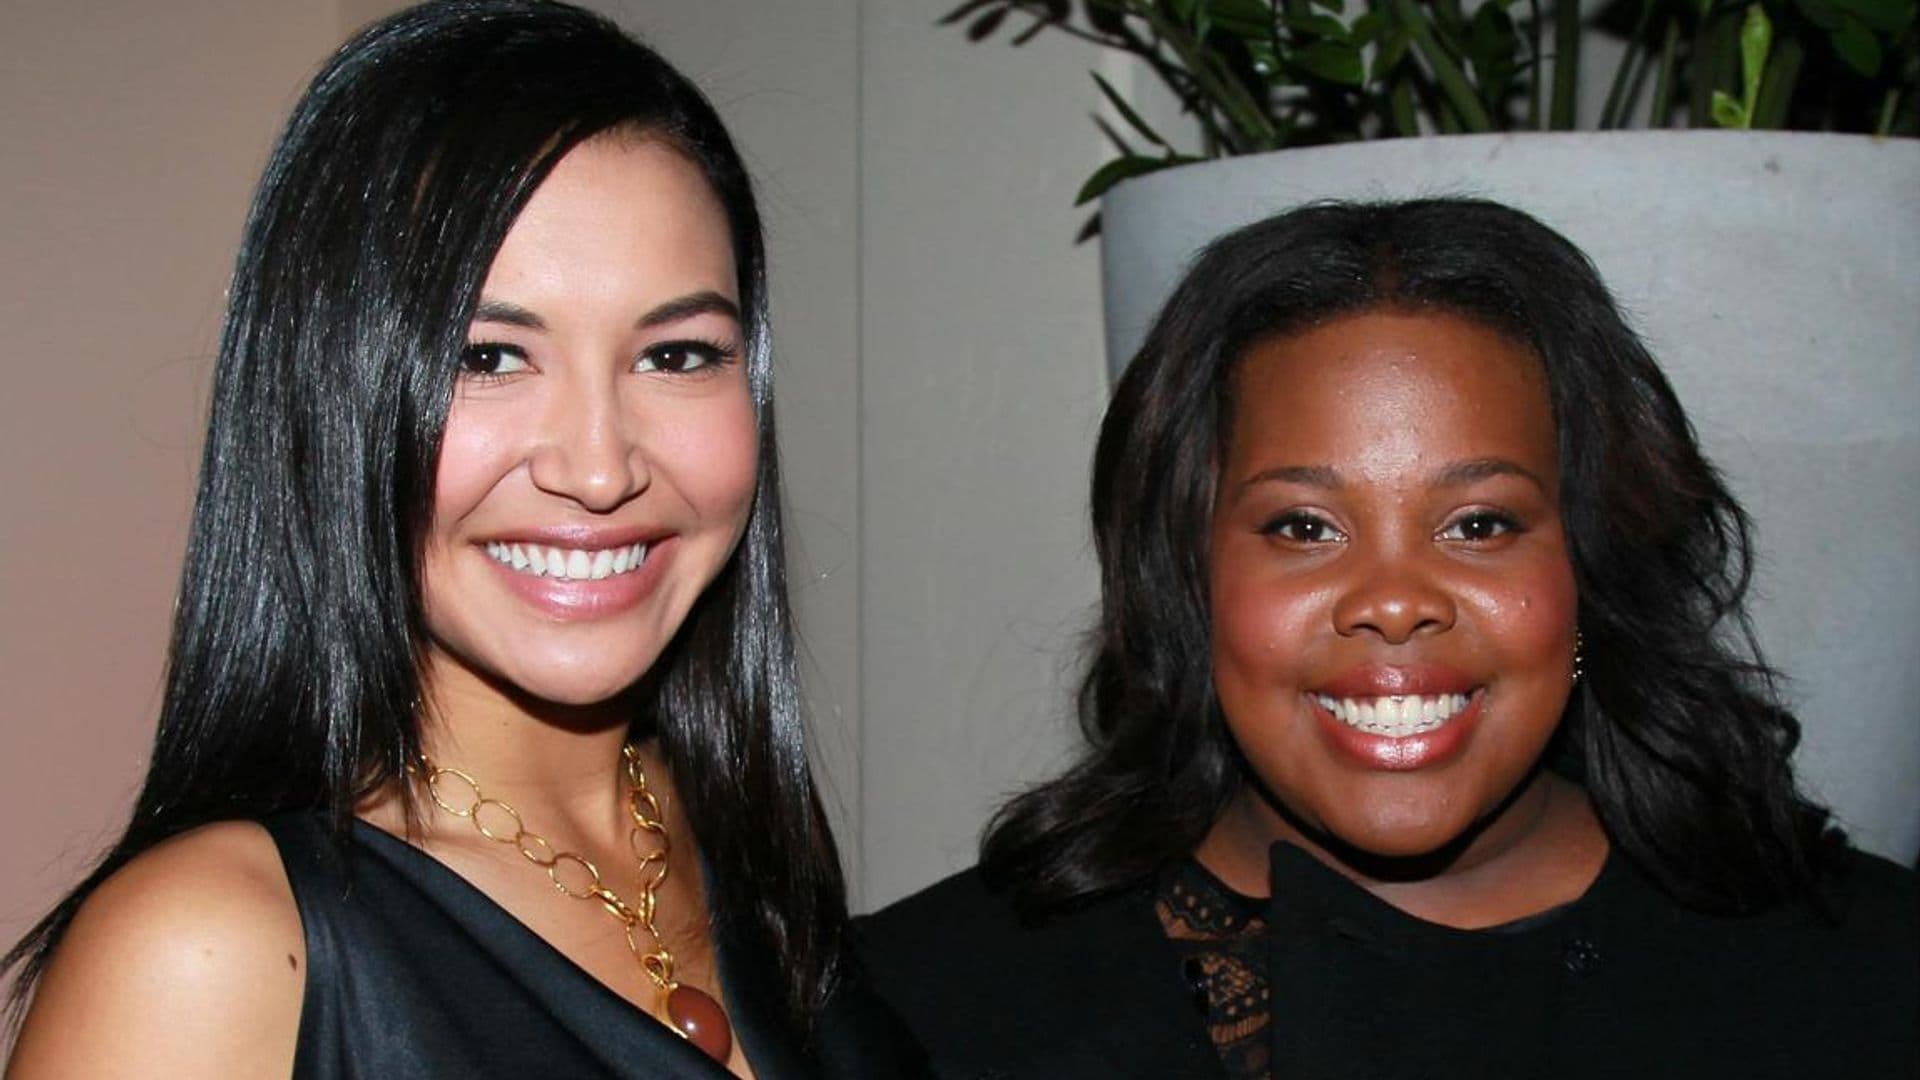 Amber Riley To Perform Tribute To Late ‘Glee’ Costar Naya Rivera on ‘Jimmy Kimmel Live!’